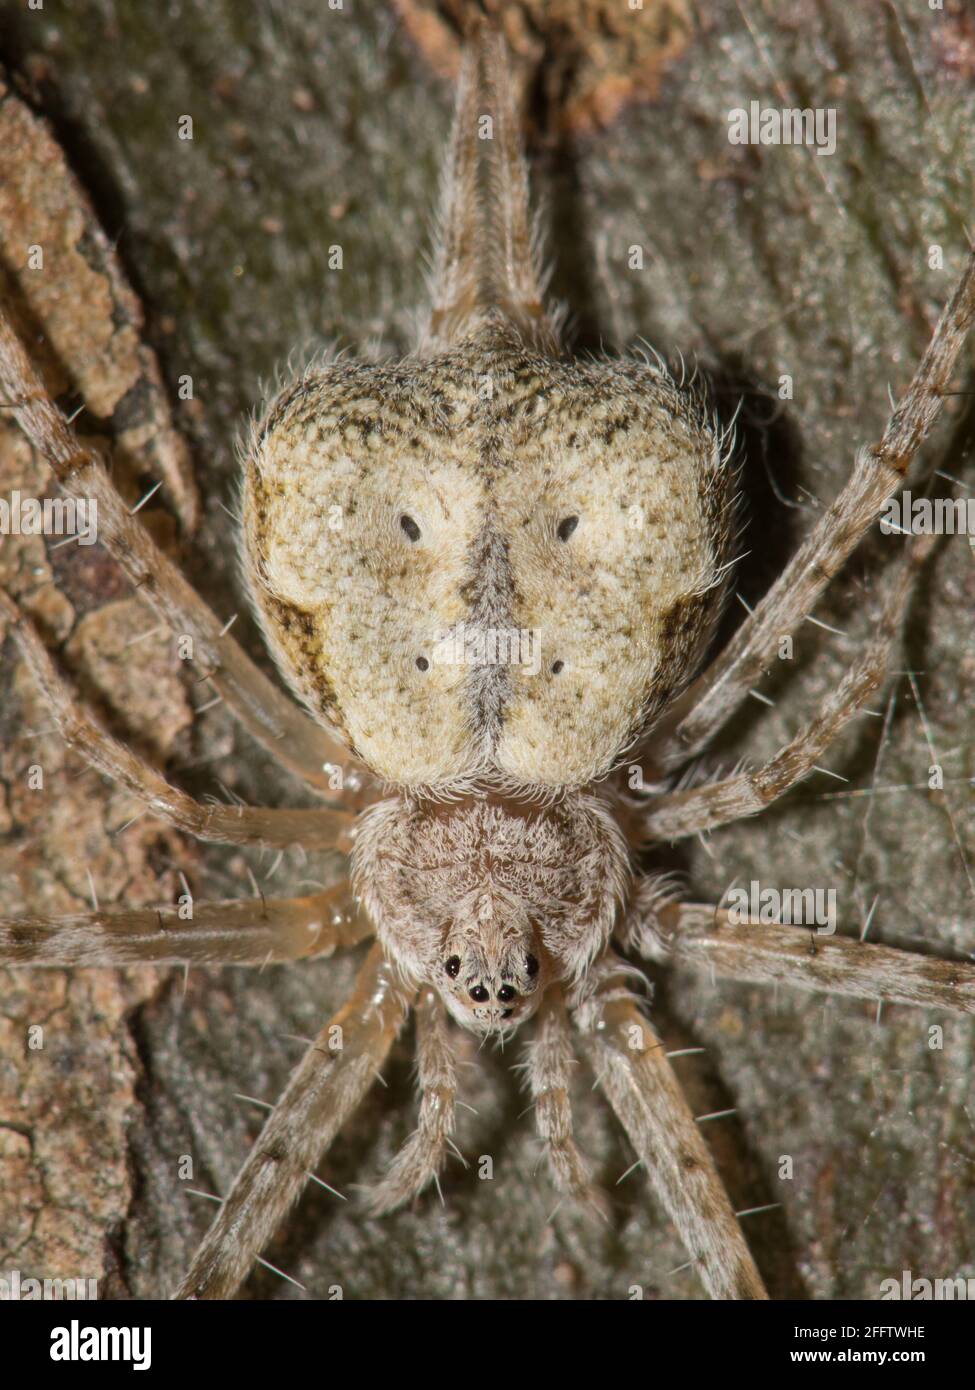 Two-tailed Spider, close up. Stock Photo